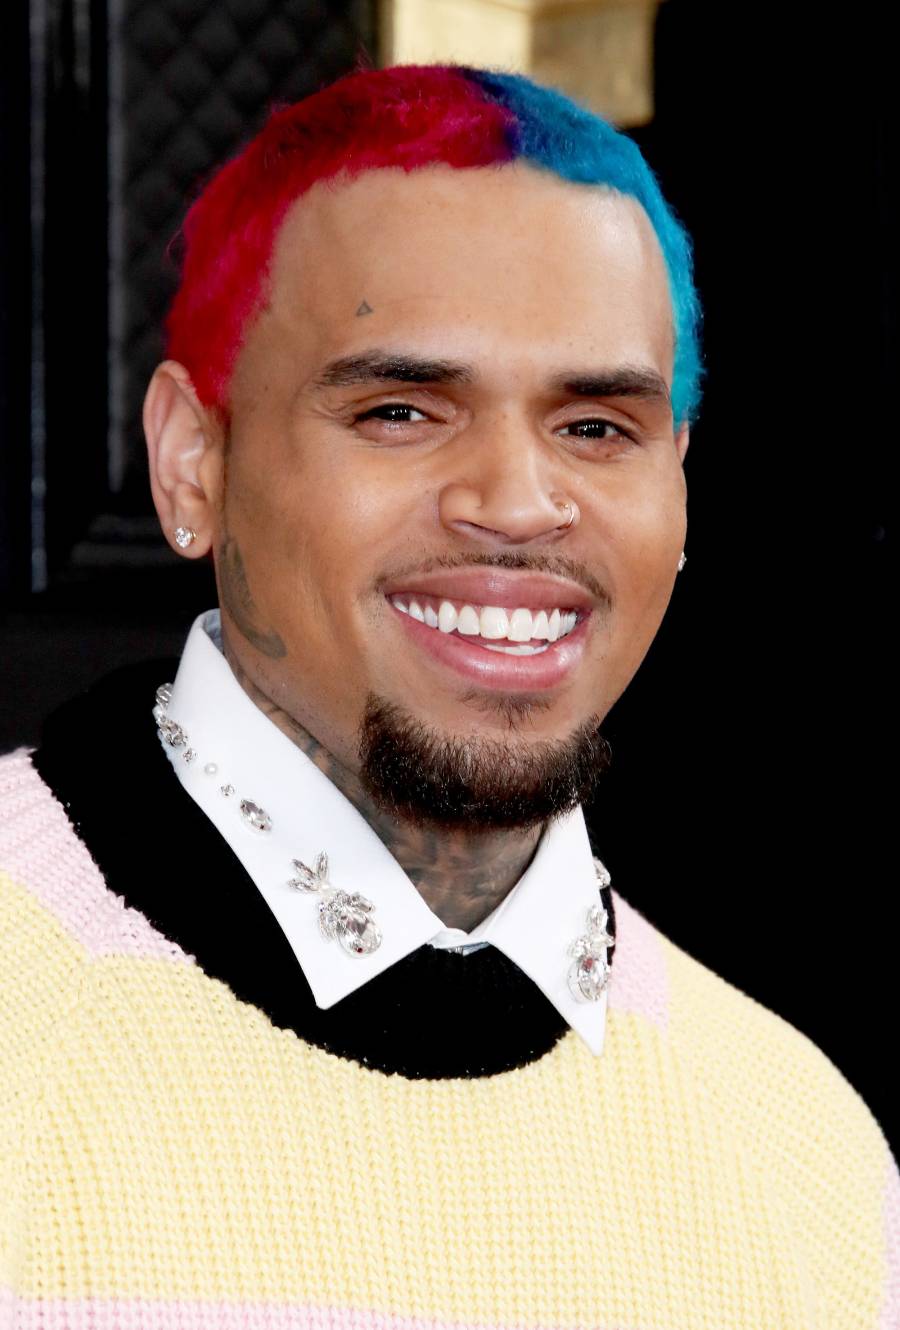 Chris Brown Dissed By 50 Cent For His Rainbow Hair